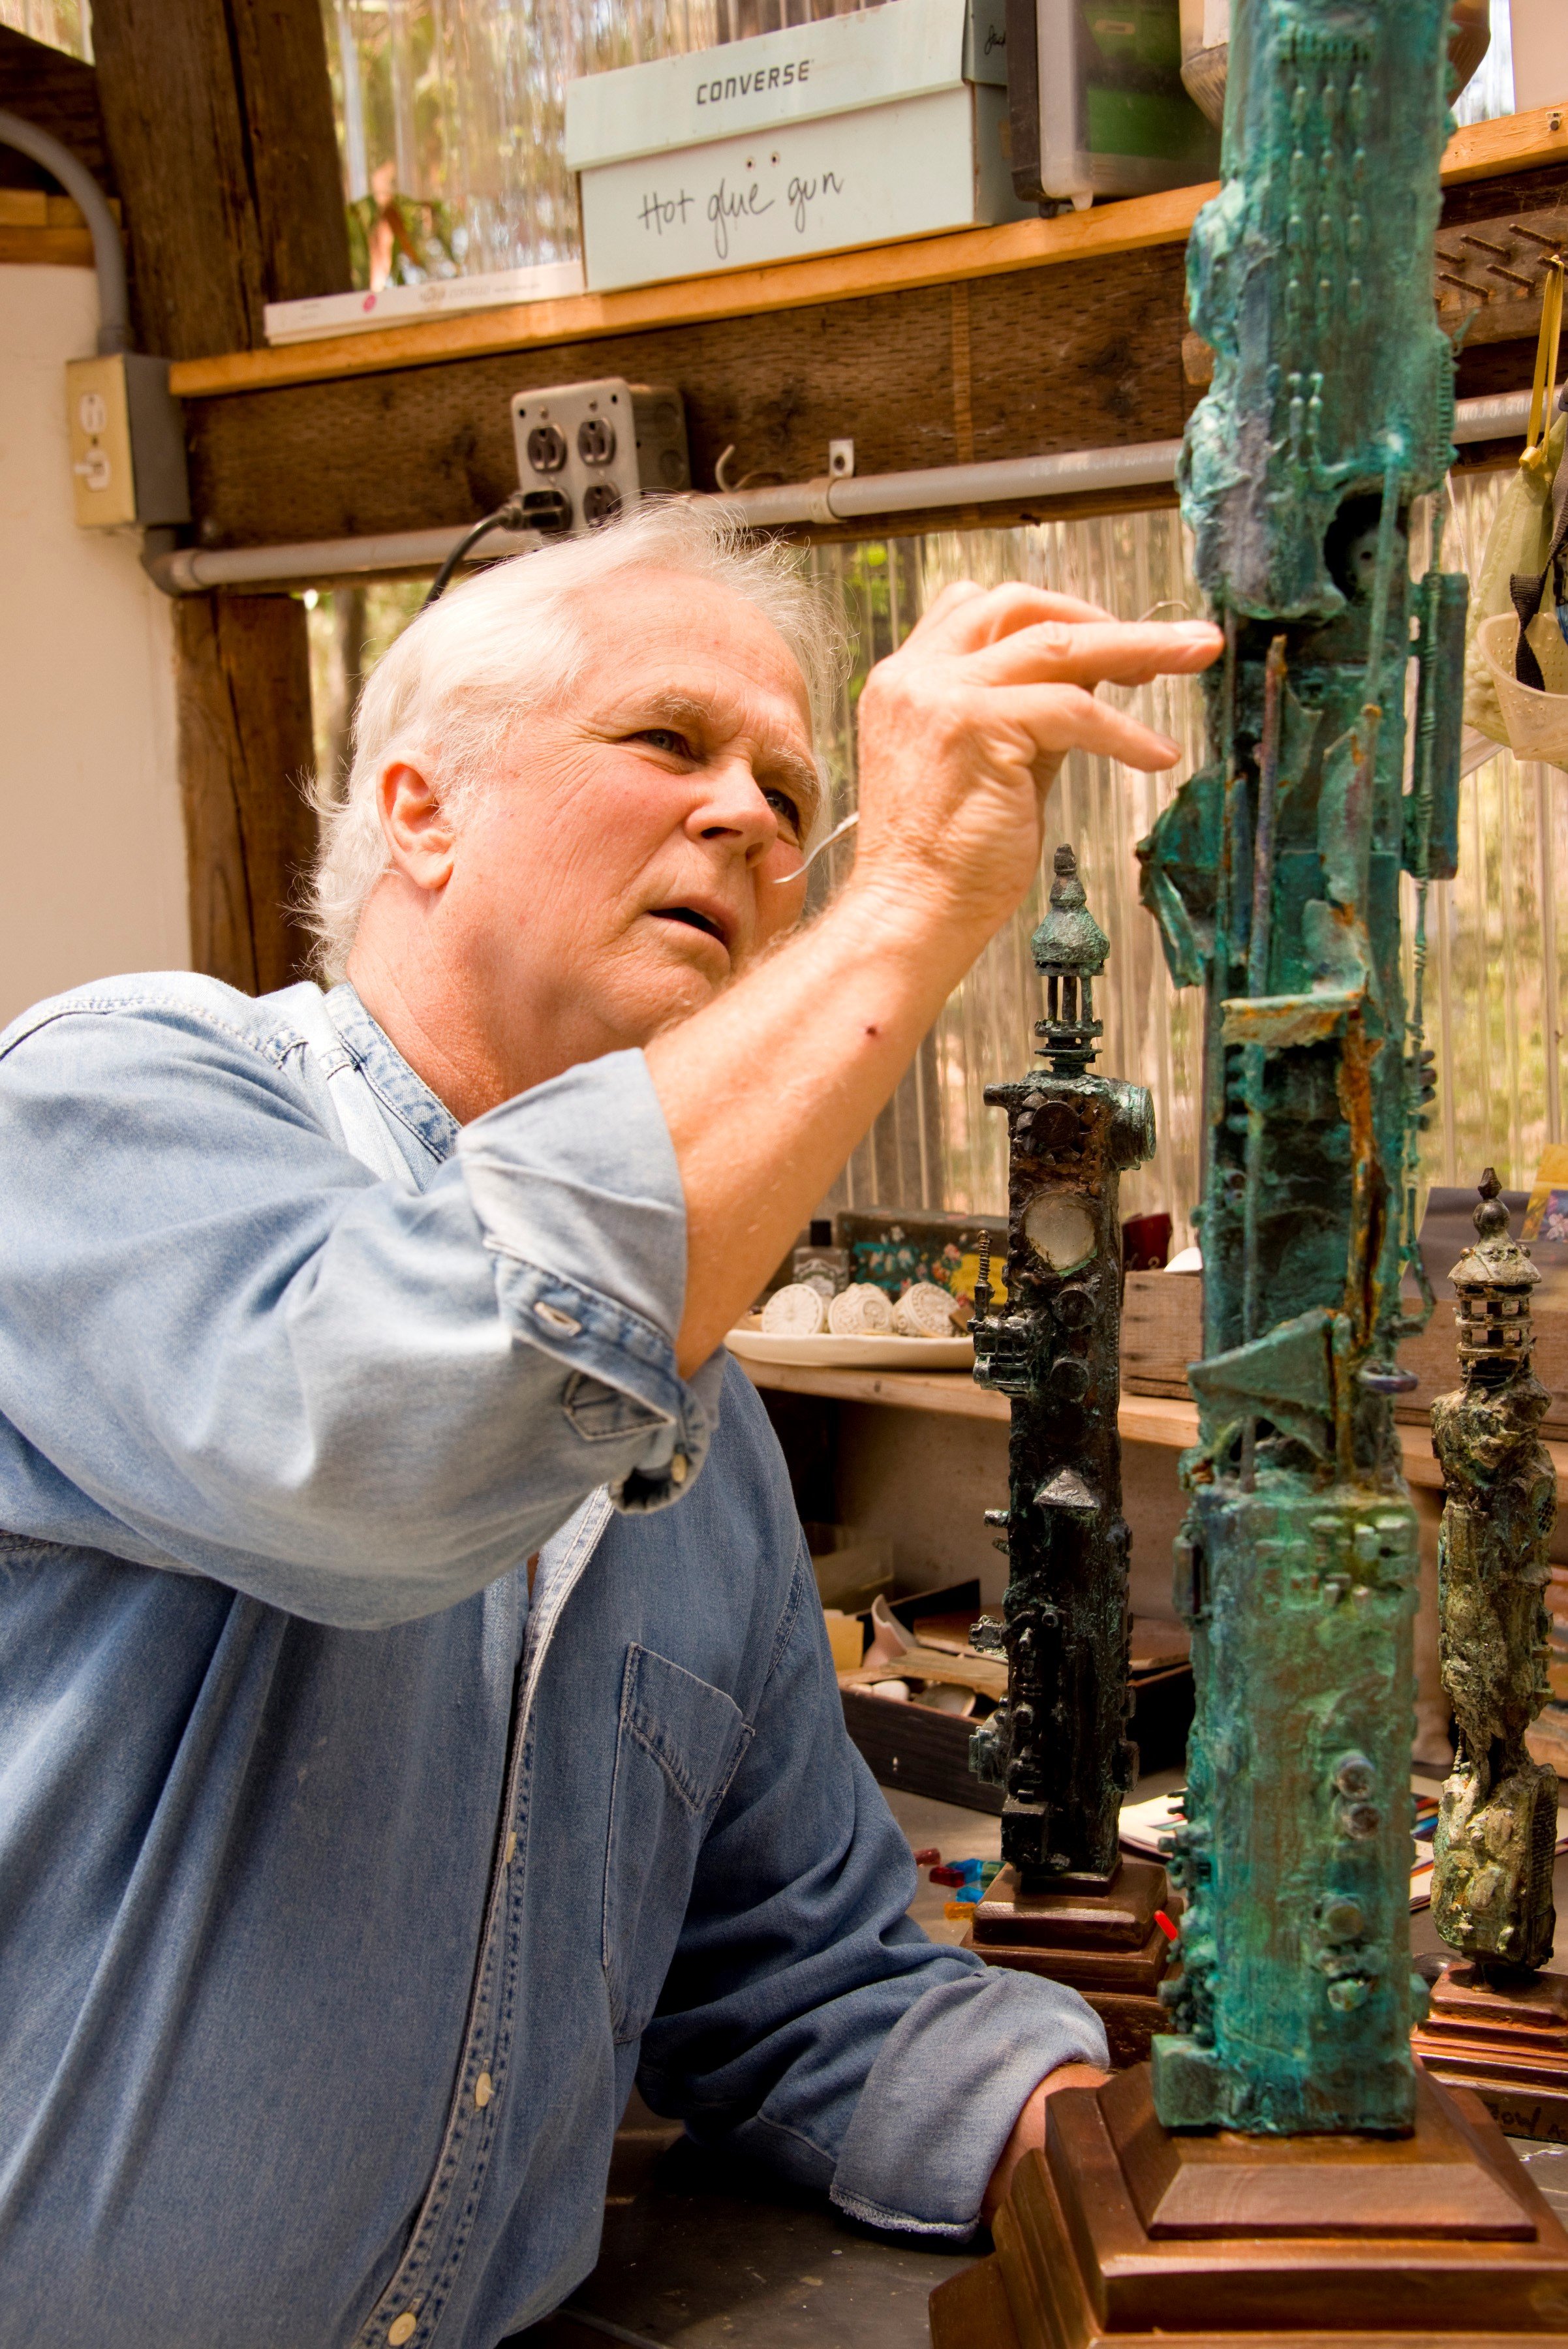 Actor and artist Tony Dow works on a sculpture in his studio on June 29, 2014 in Topanga, California. | Source: Getty Images